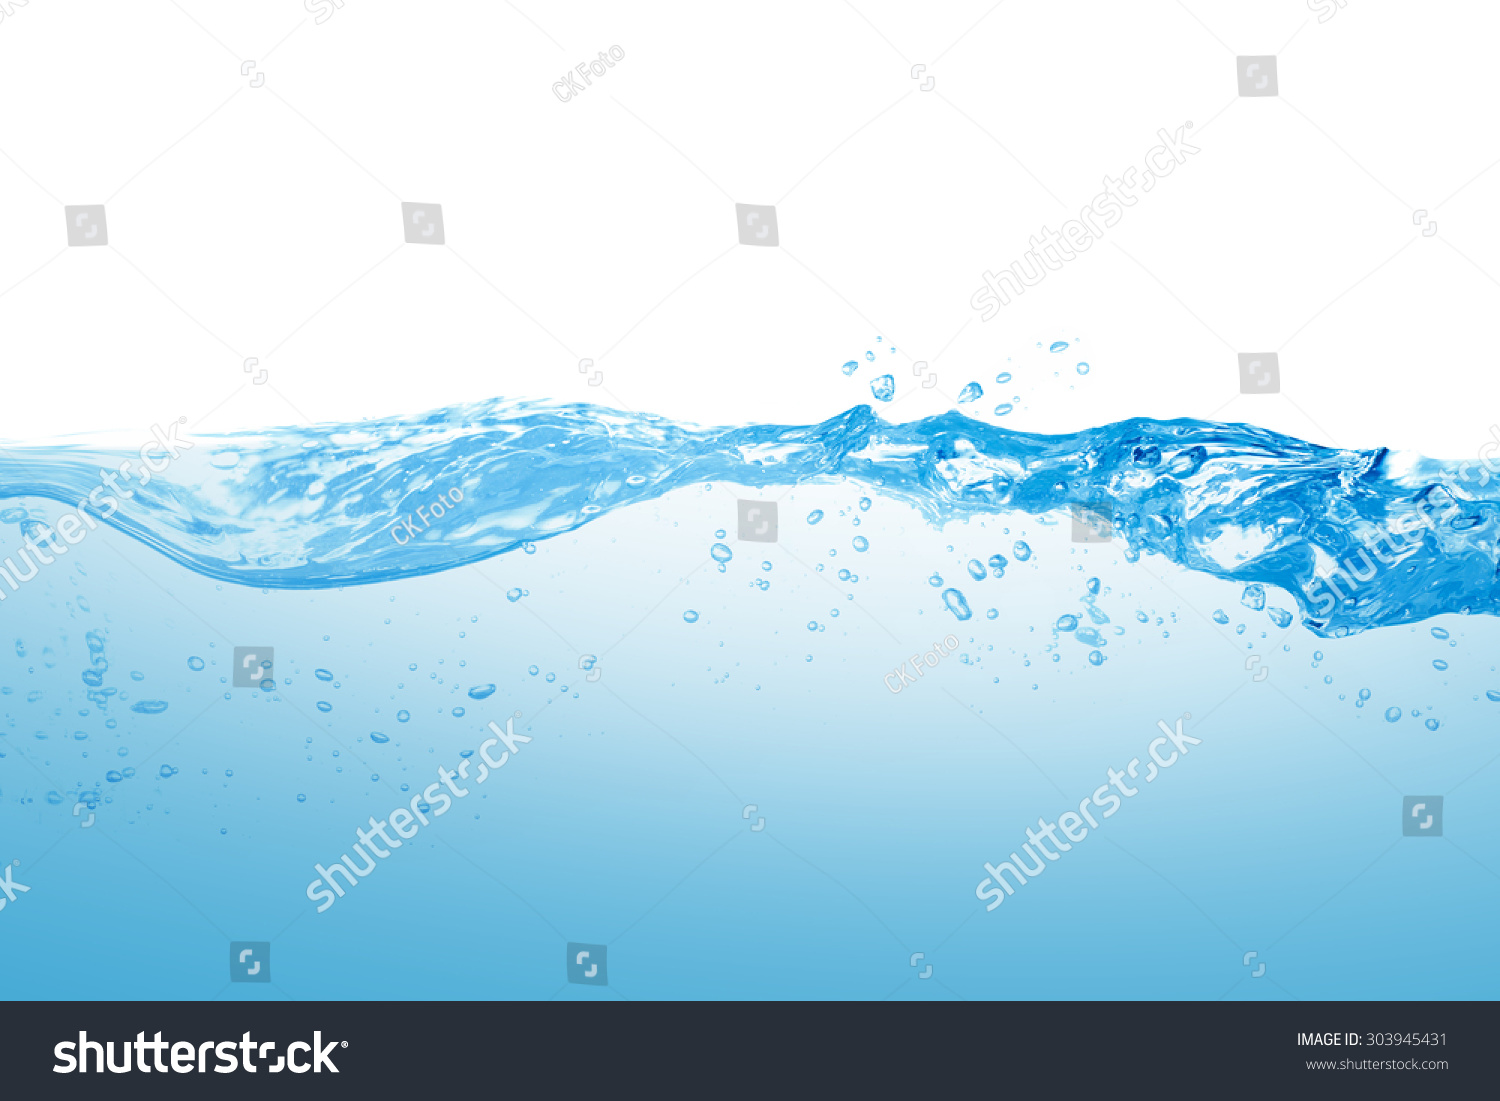 Water and air bubbles over white background #303945431